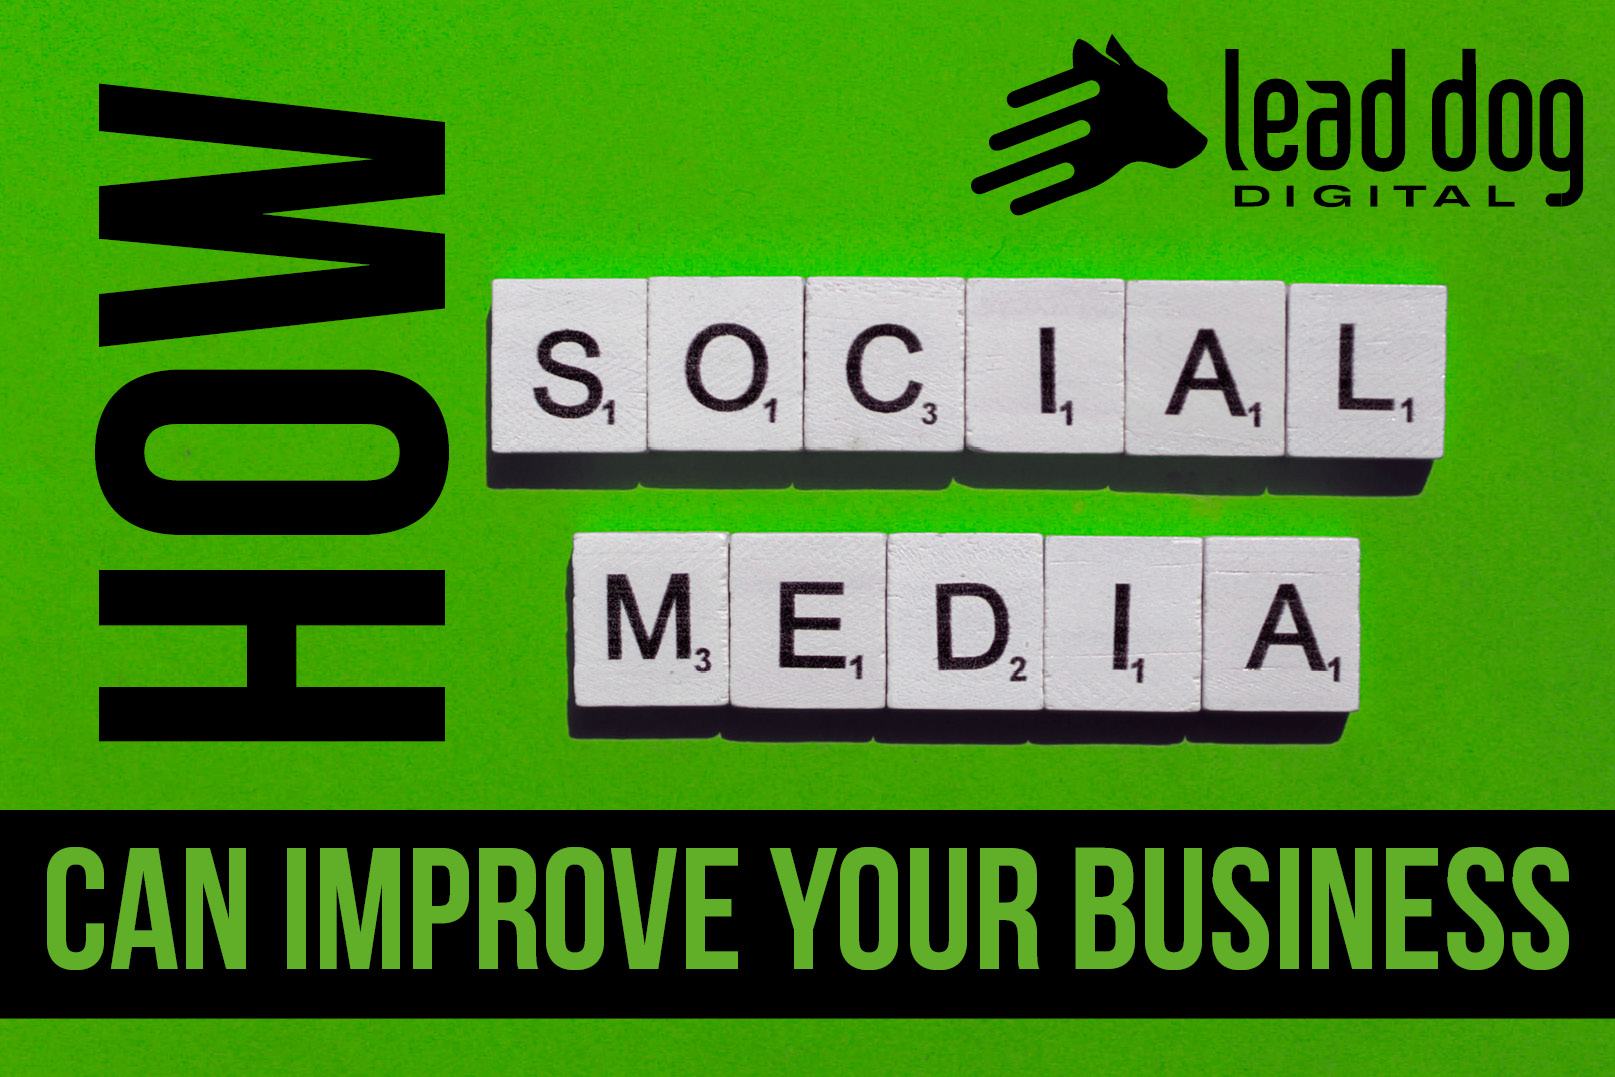 The visual shows the headline "How Social Media Can Improve your Business" and the Lead Dog Digital Tyler TX logo.